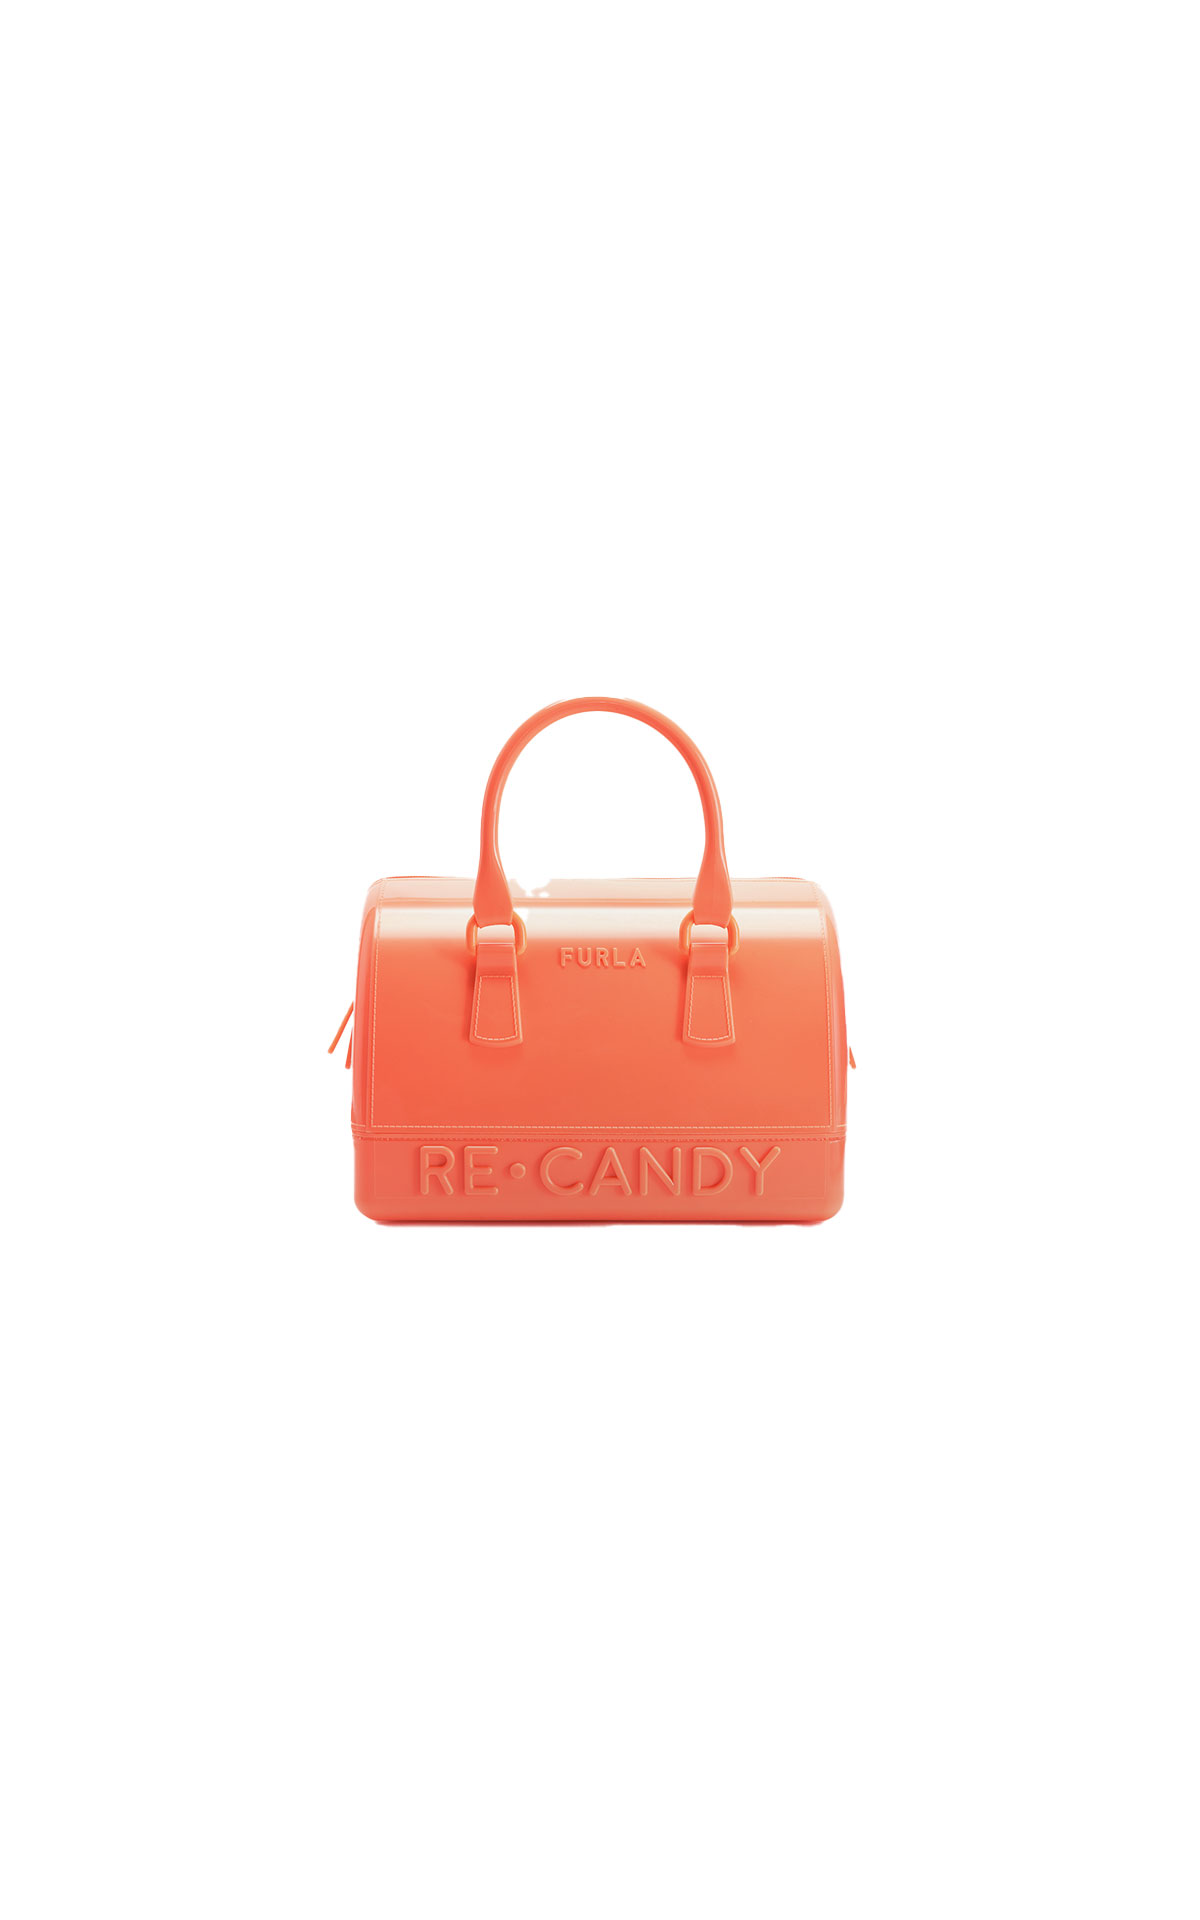 Furla Candy Boston bag from Bicester Village